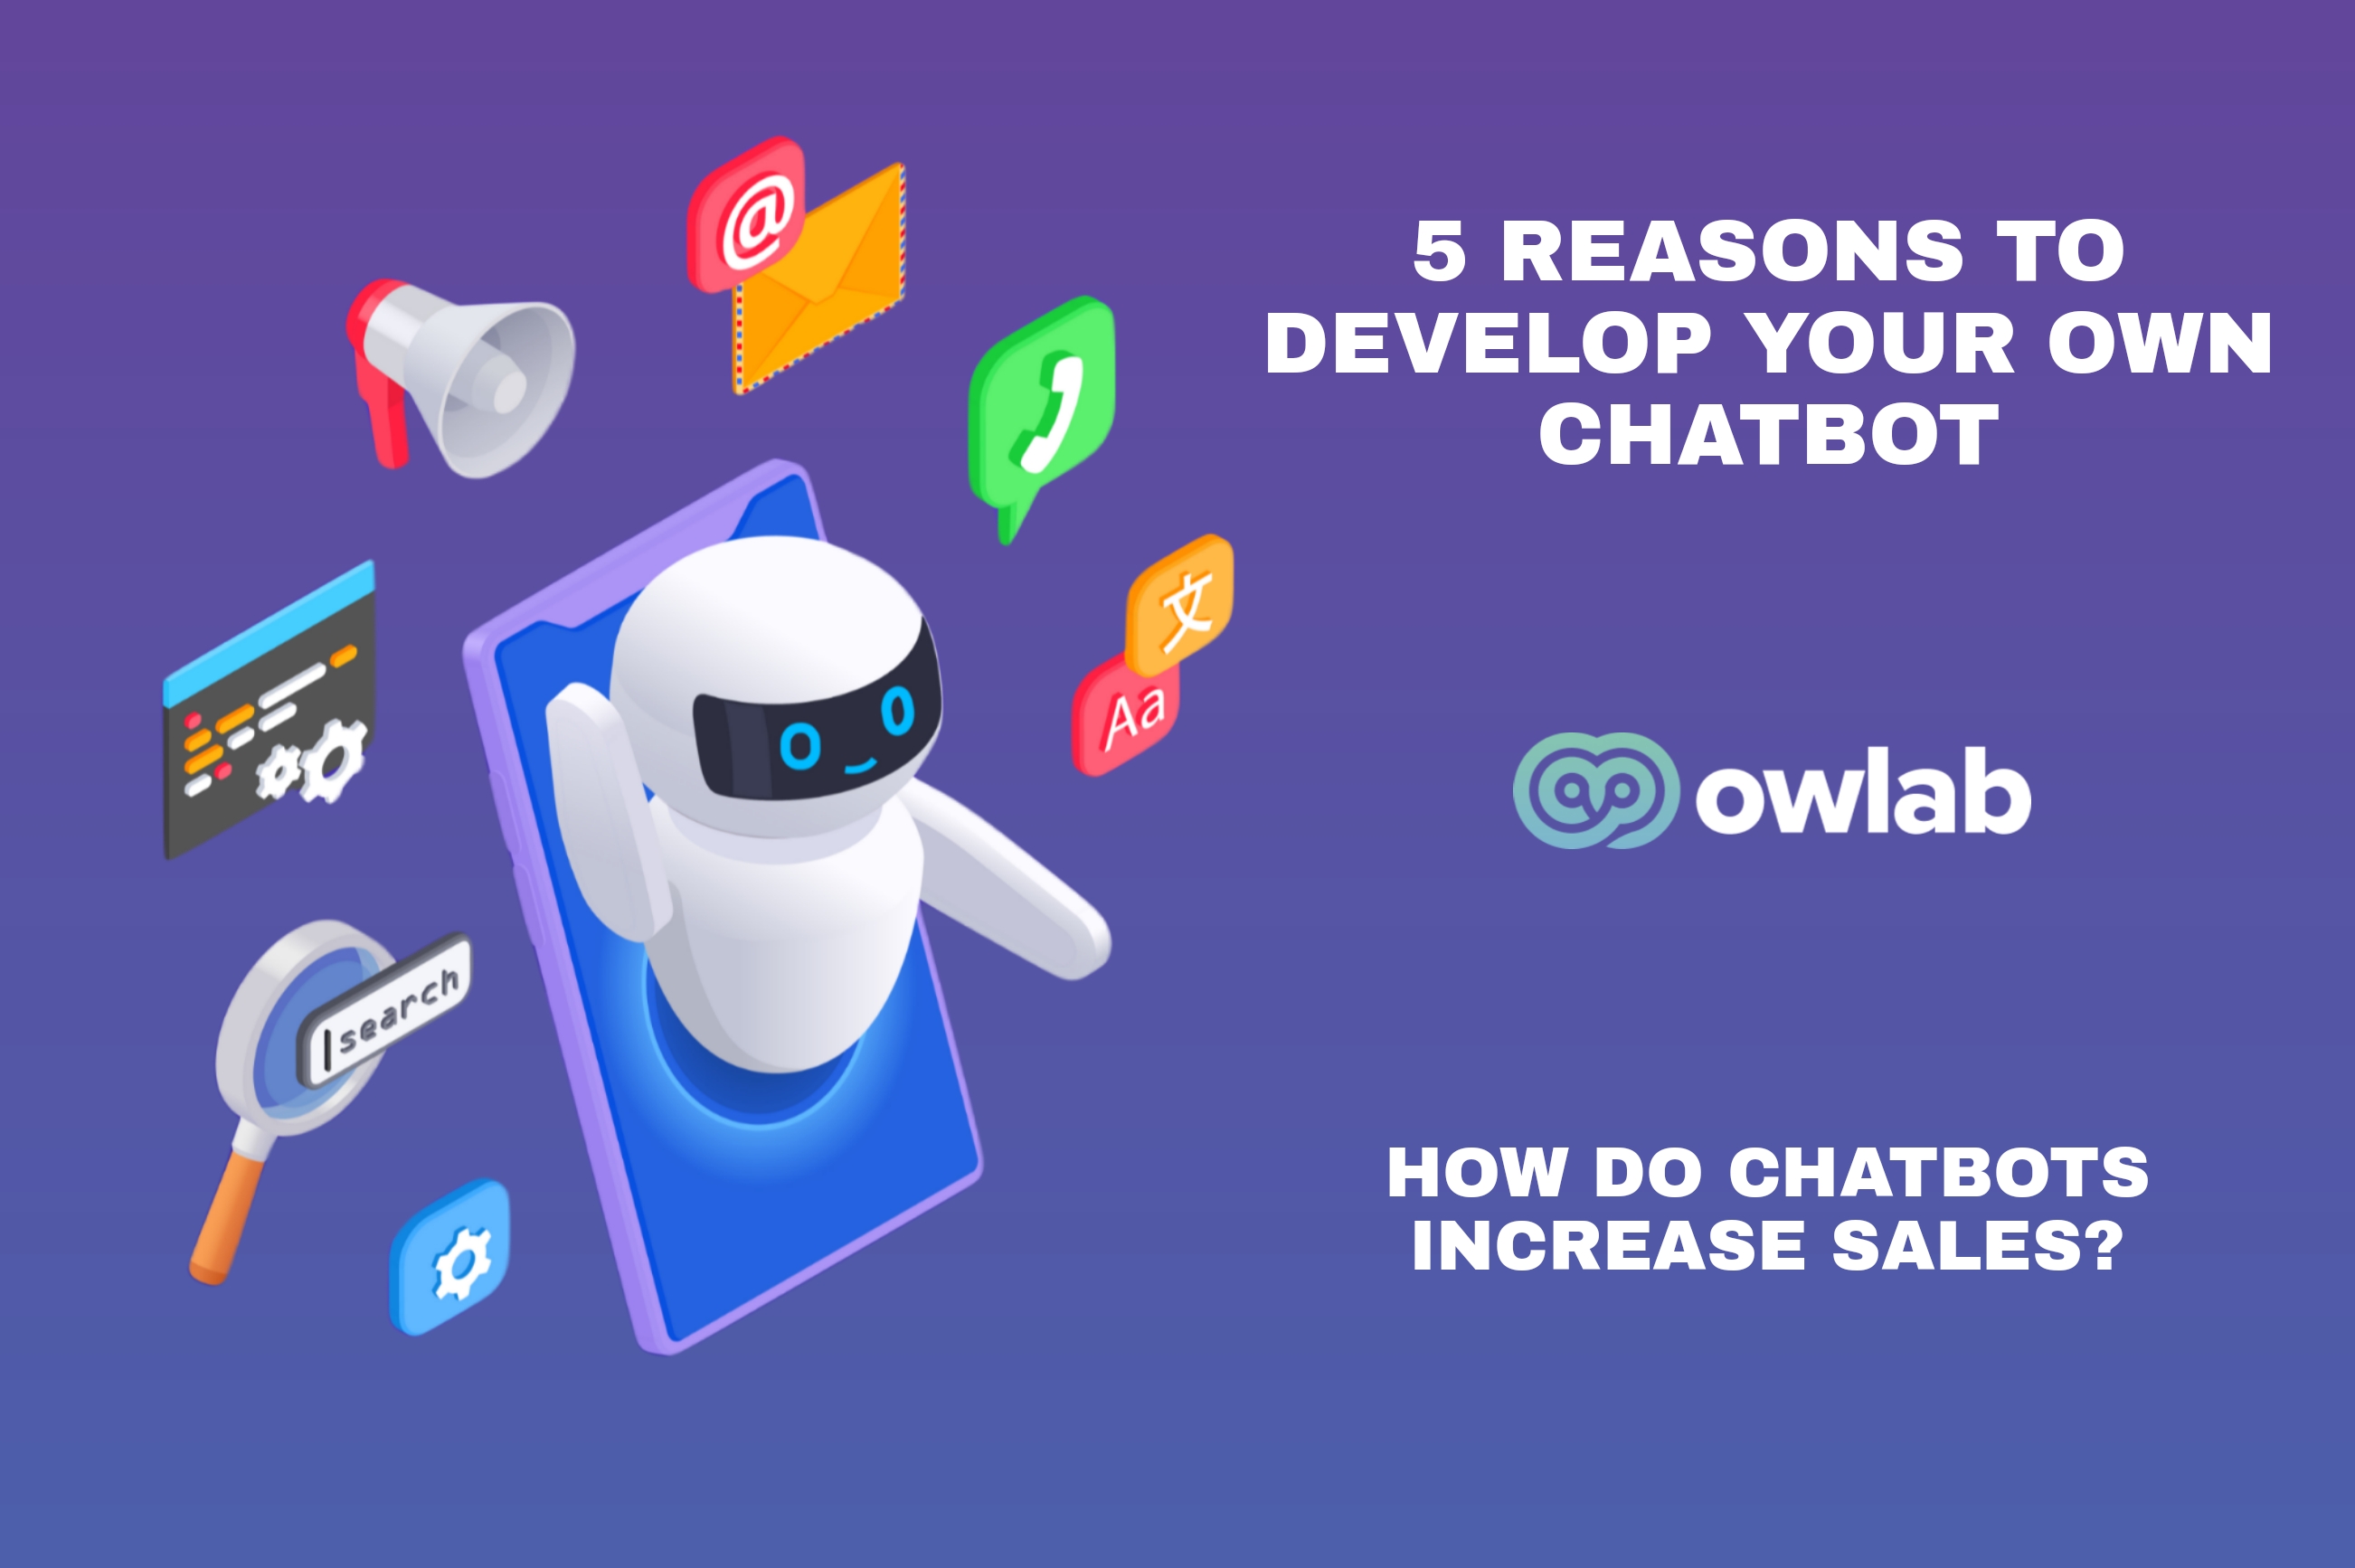 5 Reasons to Develop Your Own Chatbot: How Do Chatbots Increase Sales?